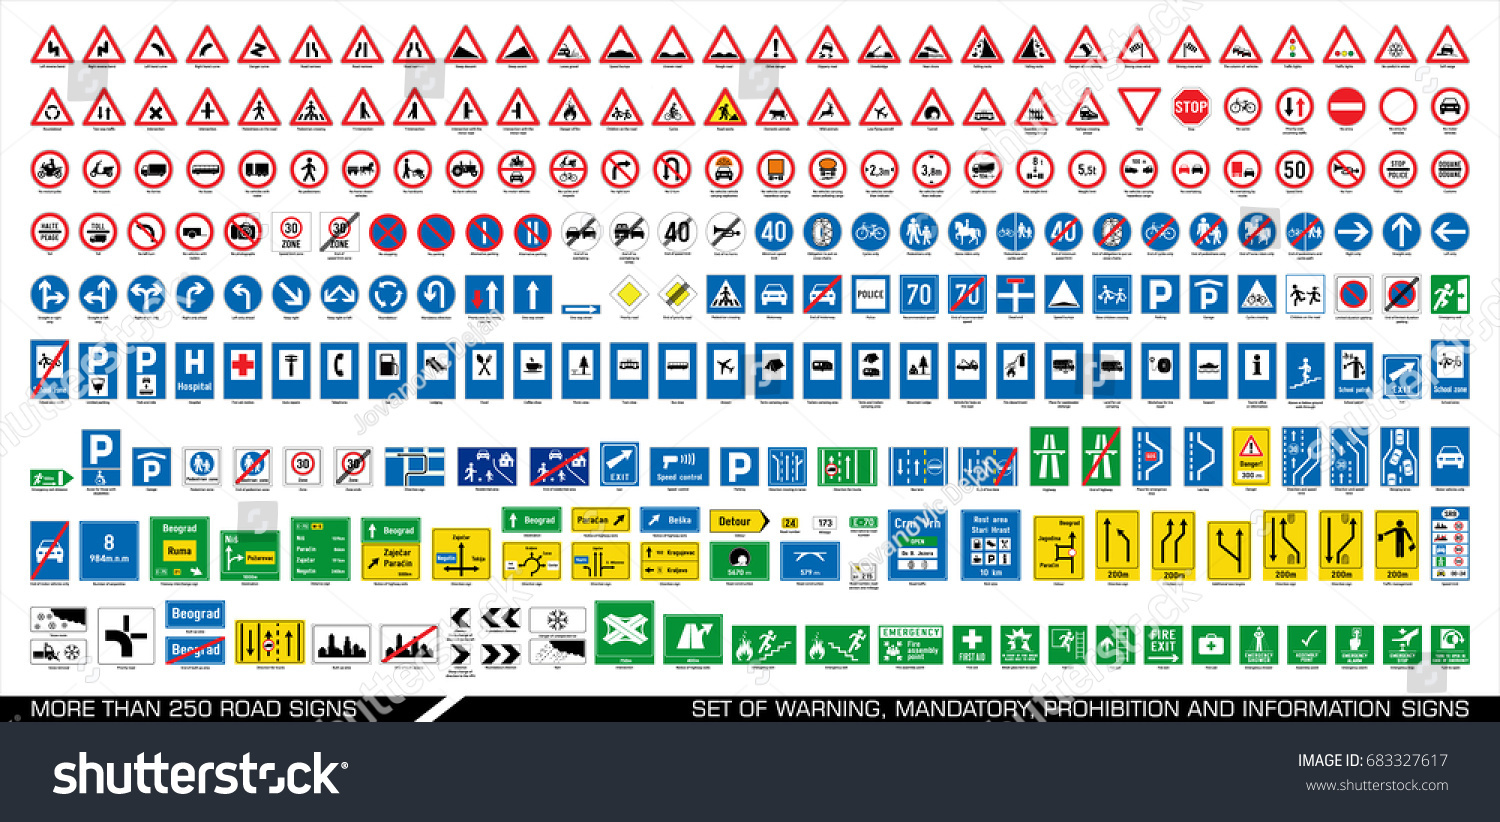 Collection of warning, mandatory, prohibition and information traffic signs. European traffic signs collection. Vector illustration.  #683327617